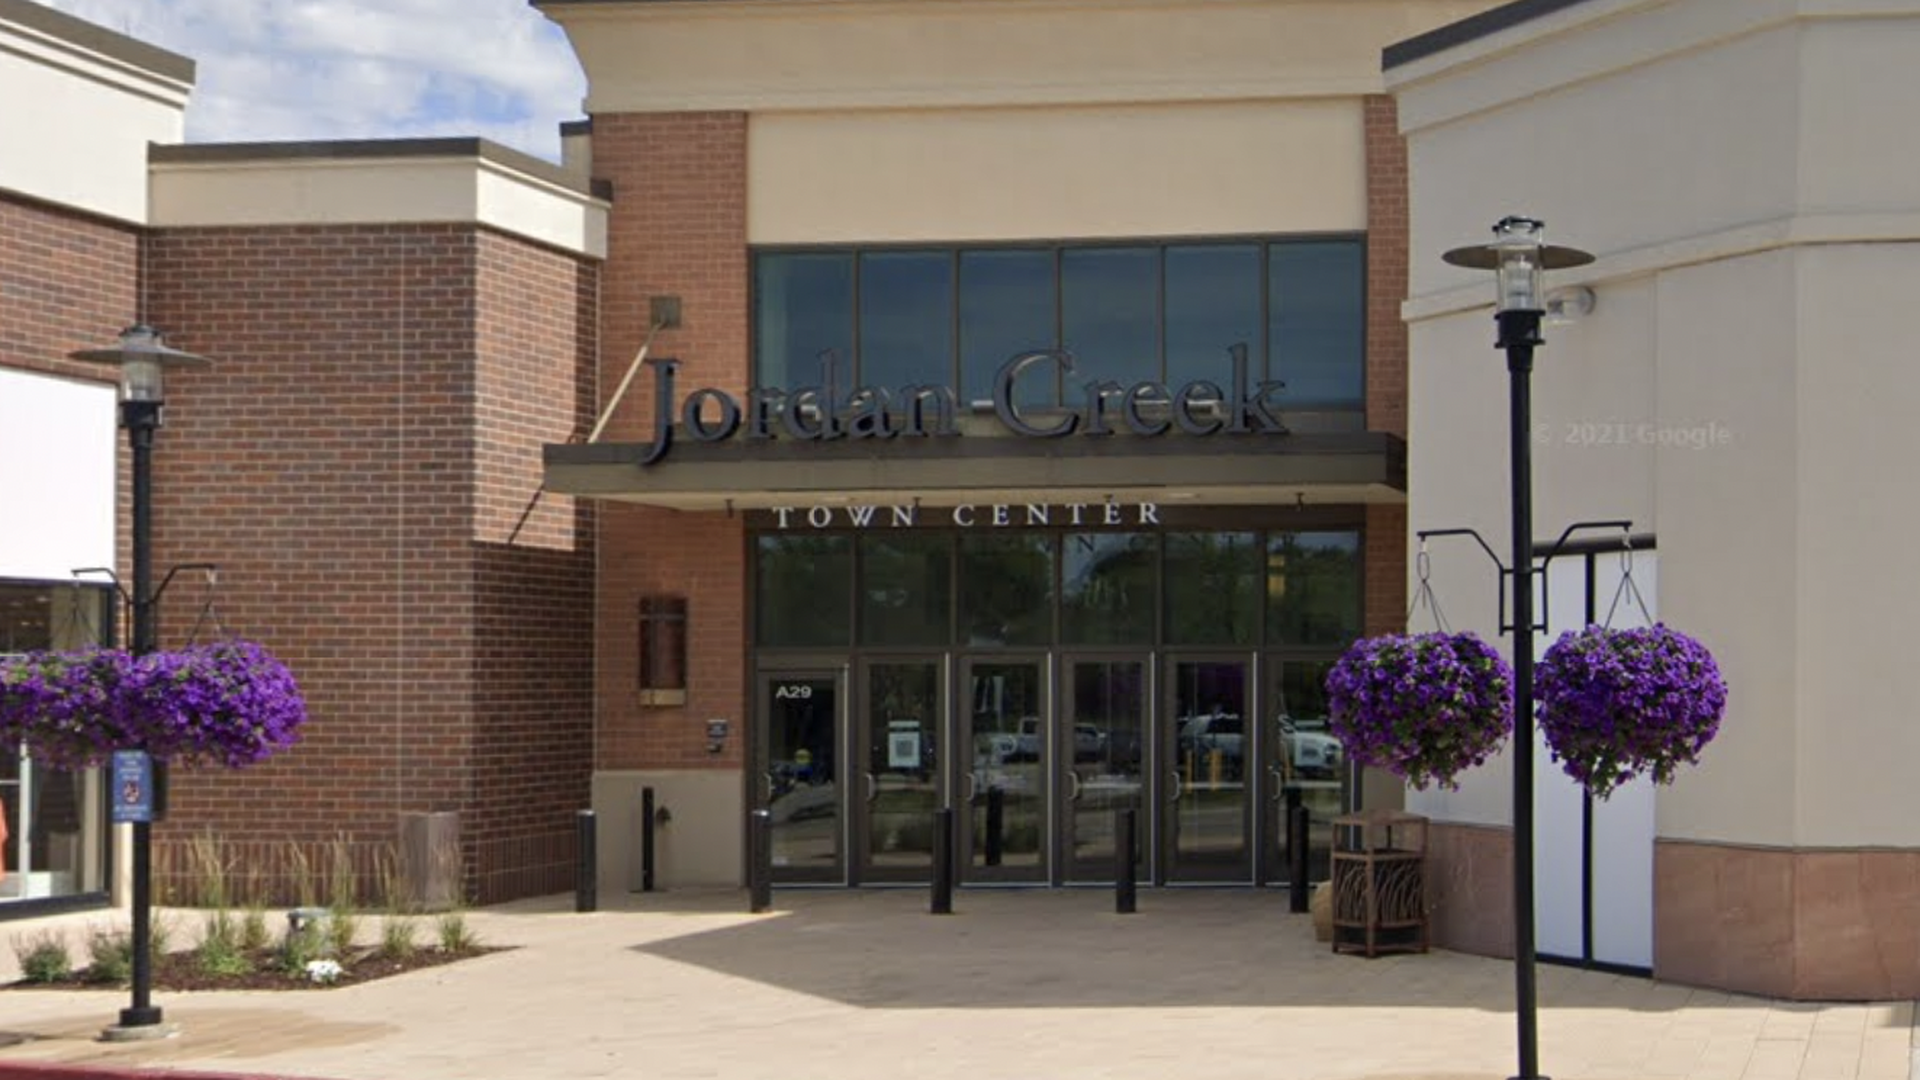 The exterior of Johnson Creek Town Center in West Des Moines.